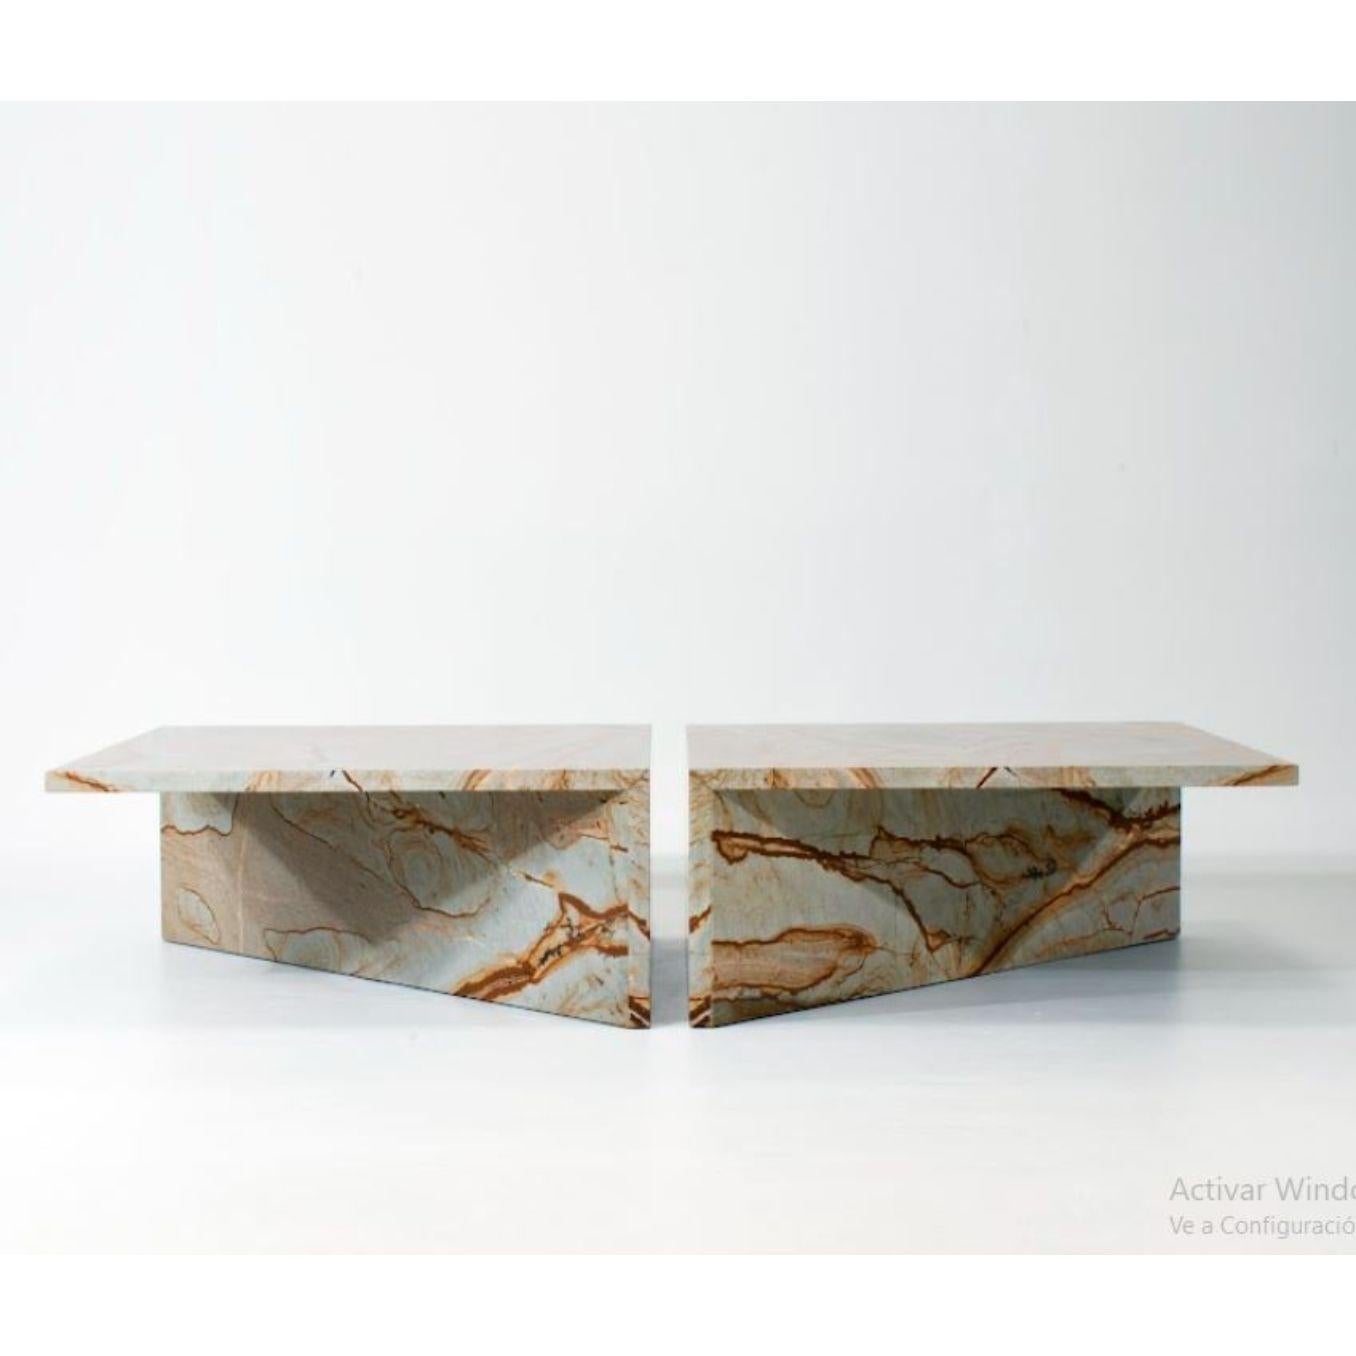 Two sides of solitude coffee table by Claste
Dimensions: D 106.7 x W 106.7 x H 35.5 cm
Material: Marble
Weight: 364 kg
Also vailable in two standard sizes.

Since 2017 Quinlan Osborne has cultivated an aesthetic in his work that is rooted in